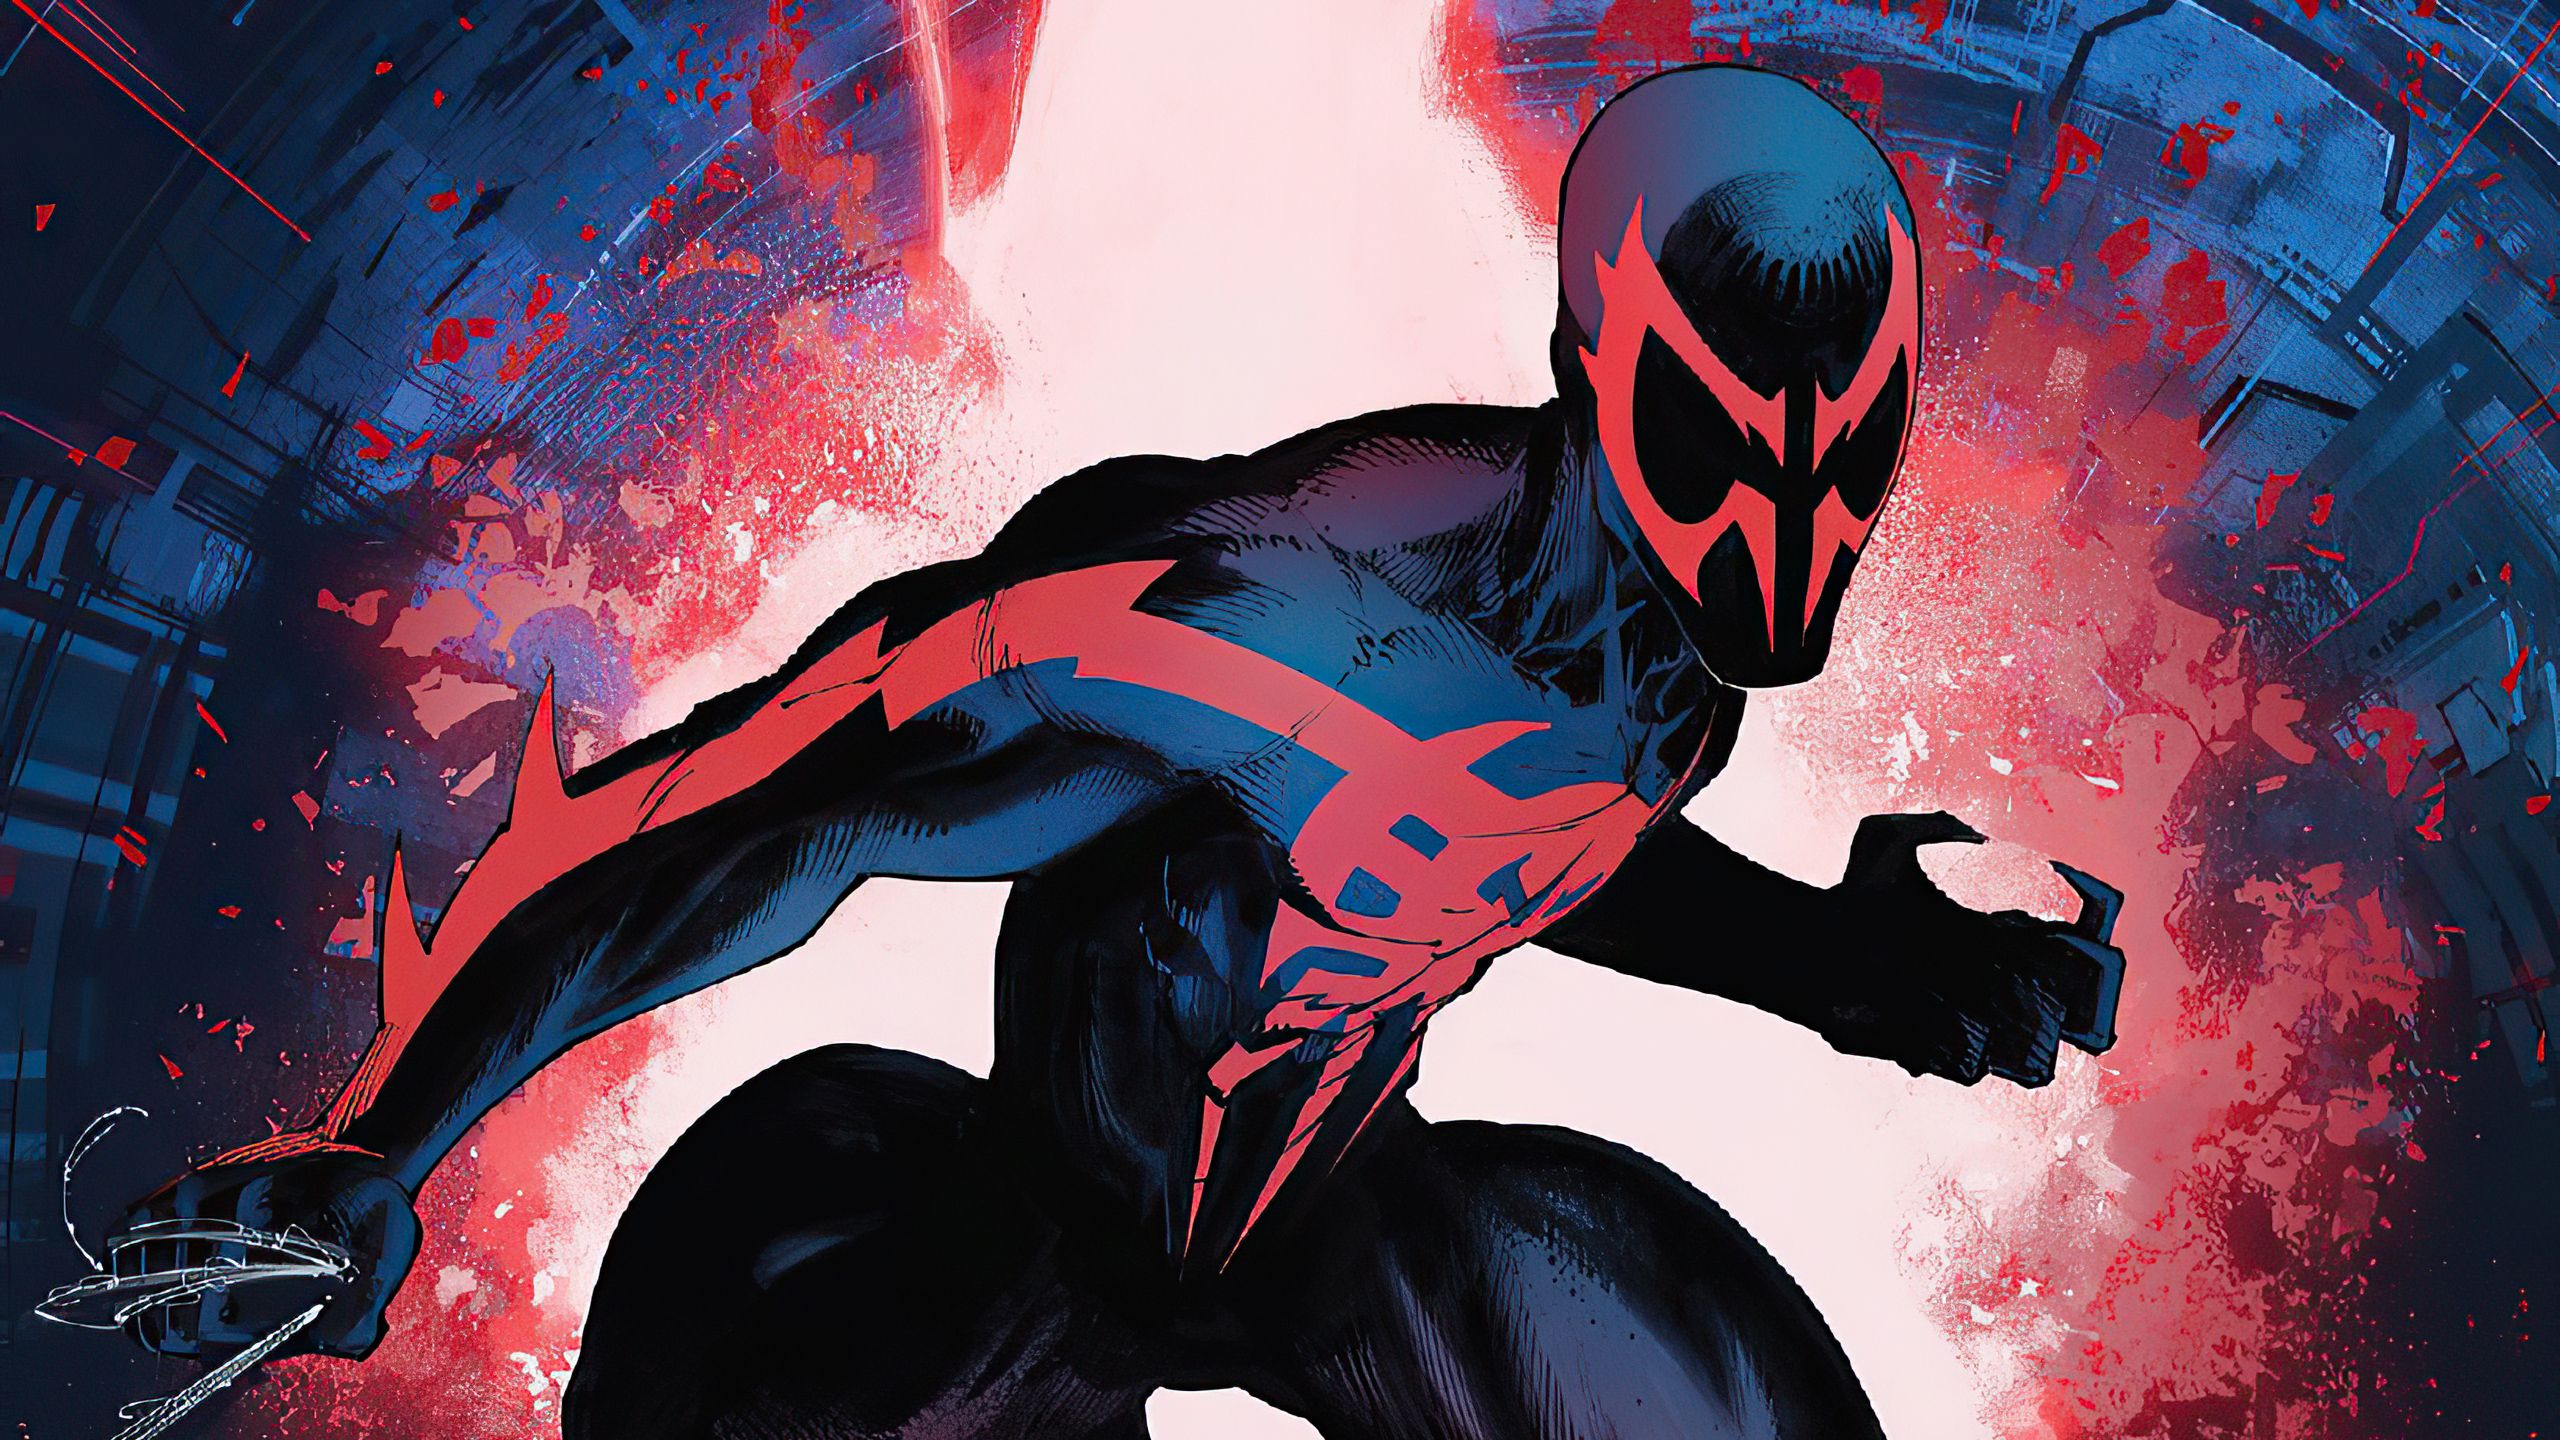 Spider Man 2099 1400x900 Resolution Wallpaper, HD Superheroes 4K Wallpaper, Image, Photo And Background